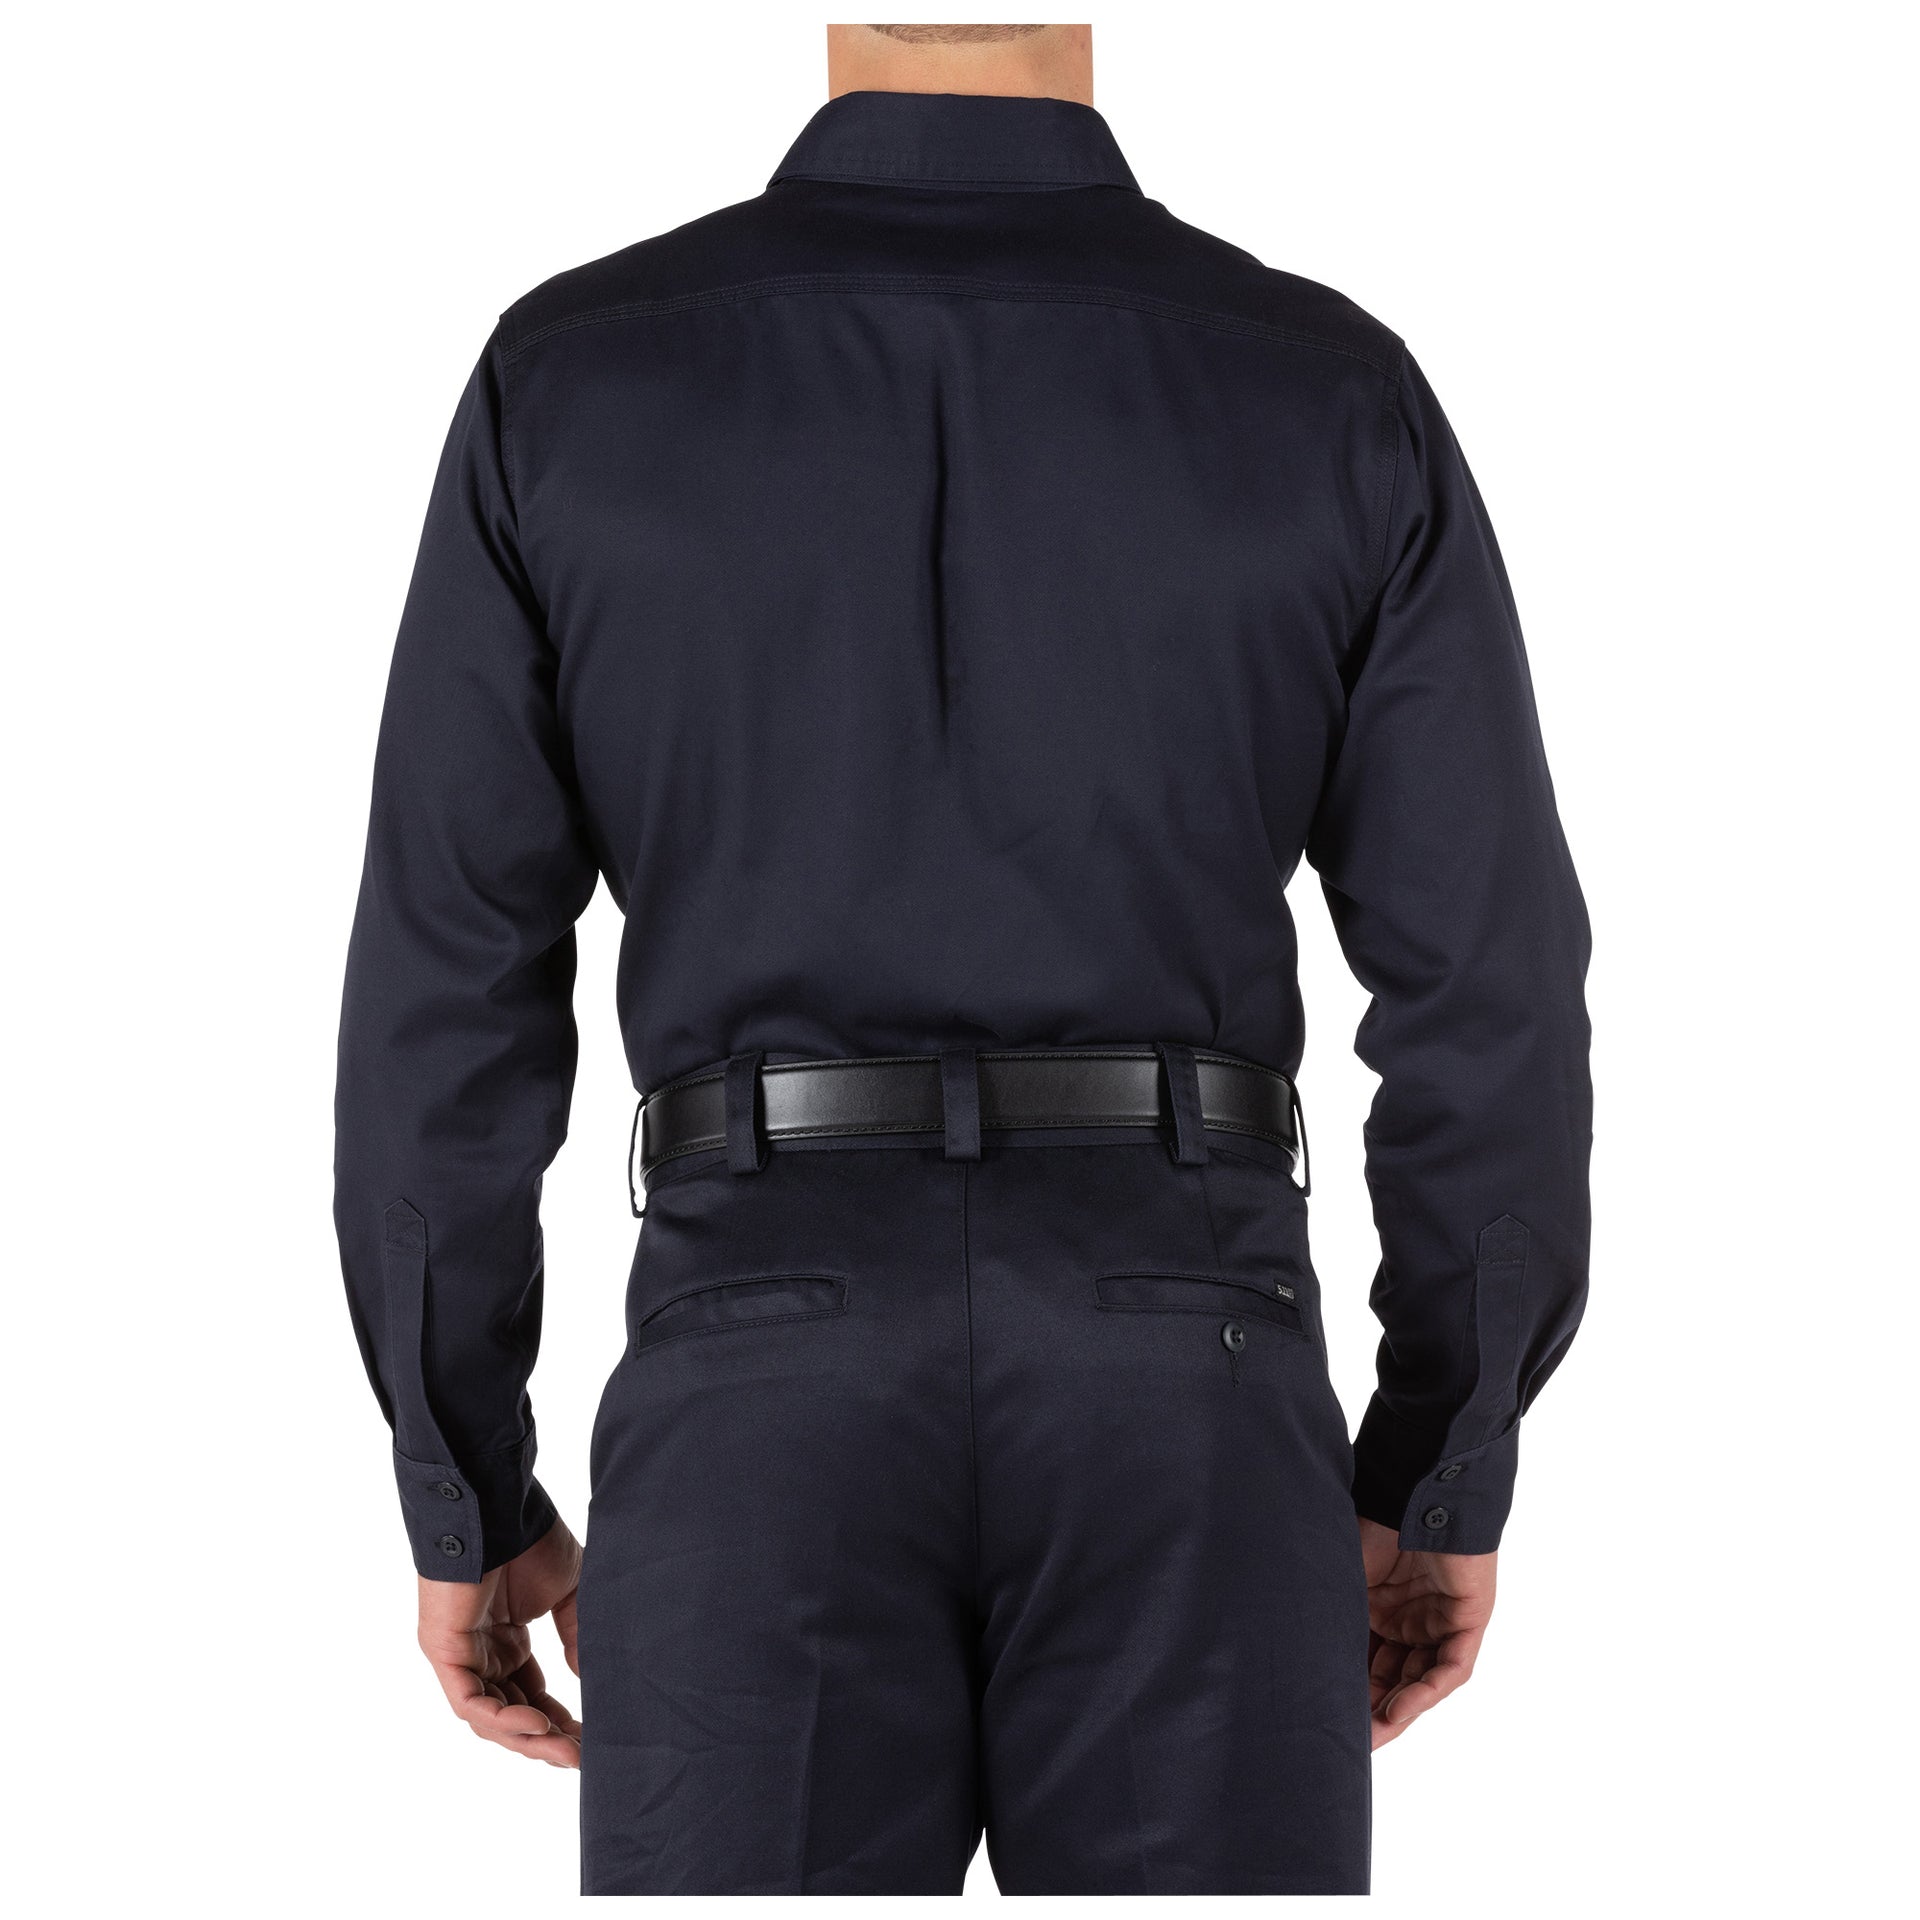 5.11 Tactical Company Long Sleeve Shirt (72515) | The Fire Center | Fuego Fire Center | Firefighter Gear | Ready to answer every call through a busy shift, the Company Shirt backs you with a vital layer of safety (certified to NFPA 1975, 2019 edition) in a high-tech, low maintenance fabric. It’s made with a soft, yet durable cotton twill that’s wrinkle-resistant and stitched with protective Firefly™ thread. 